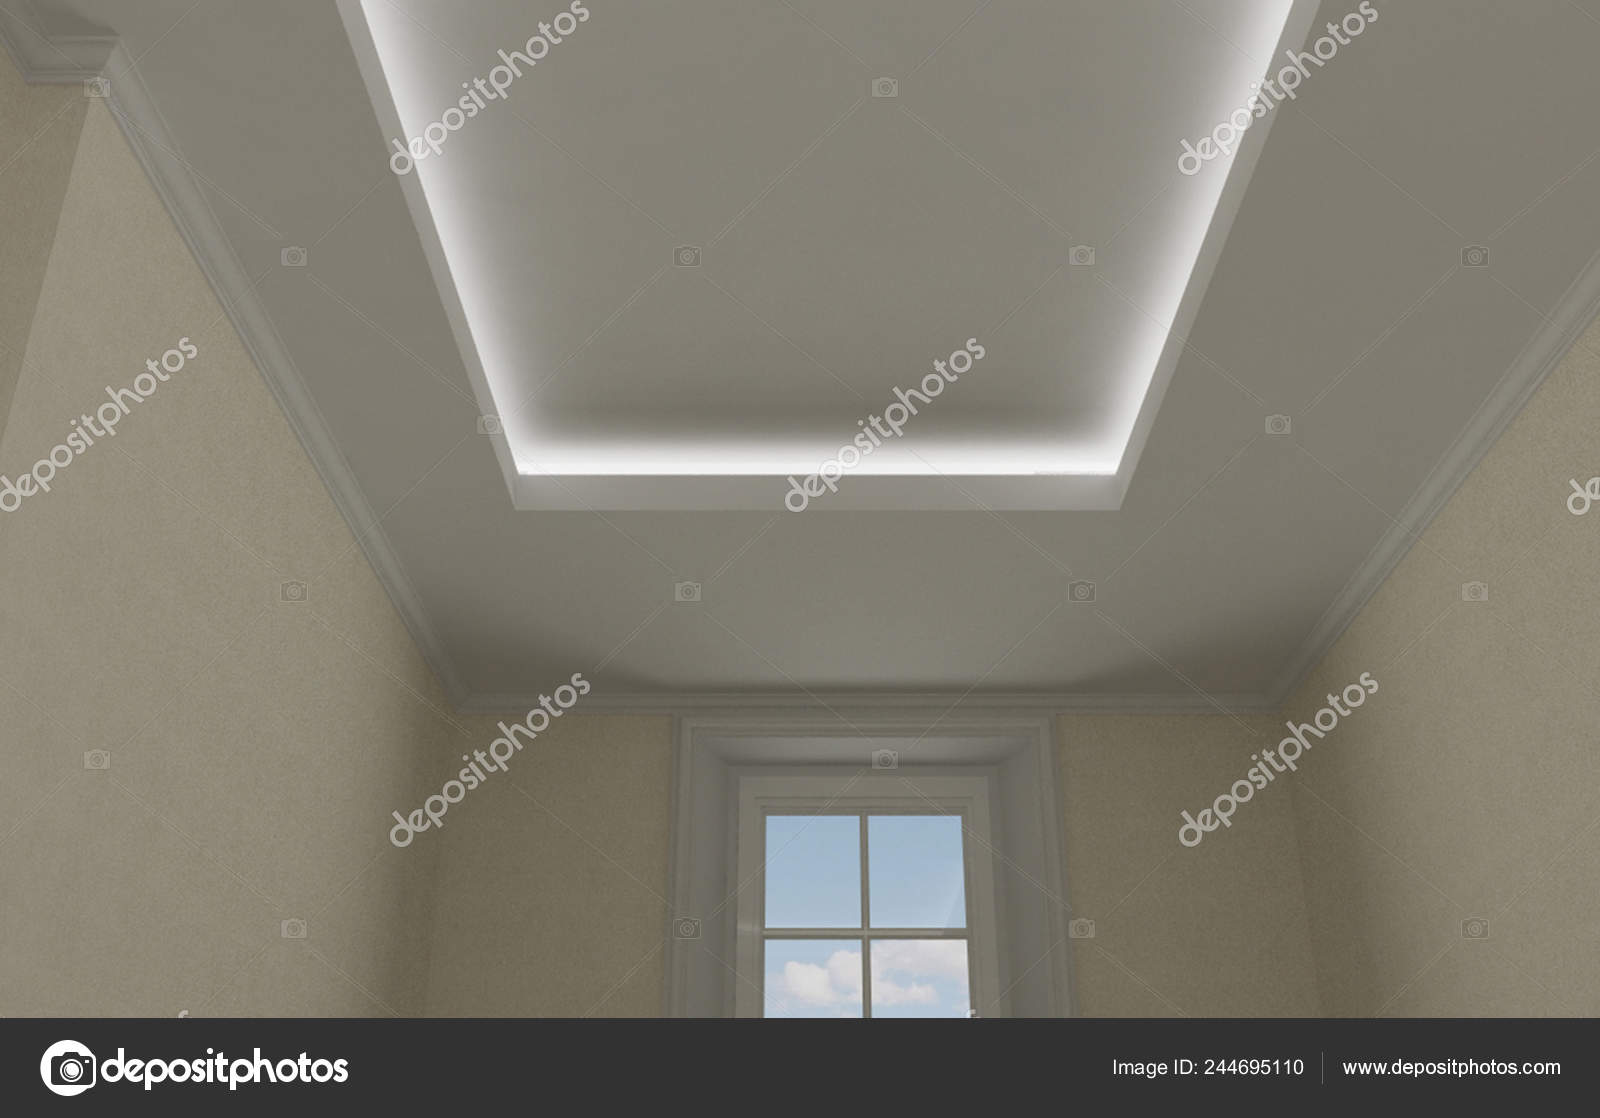 Ceiling Close Classic Interior Vintage Room Stucco Moldings Beige Wallpaper Stock Photo By C Archiviz